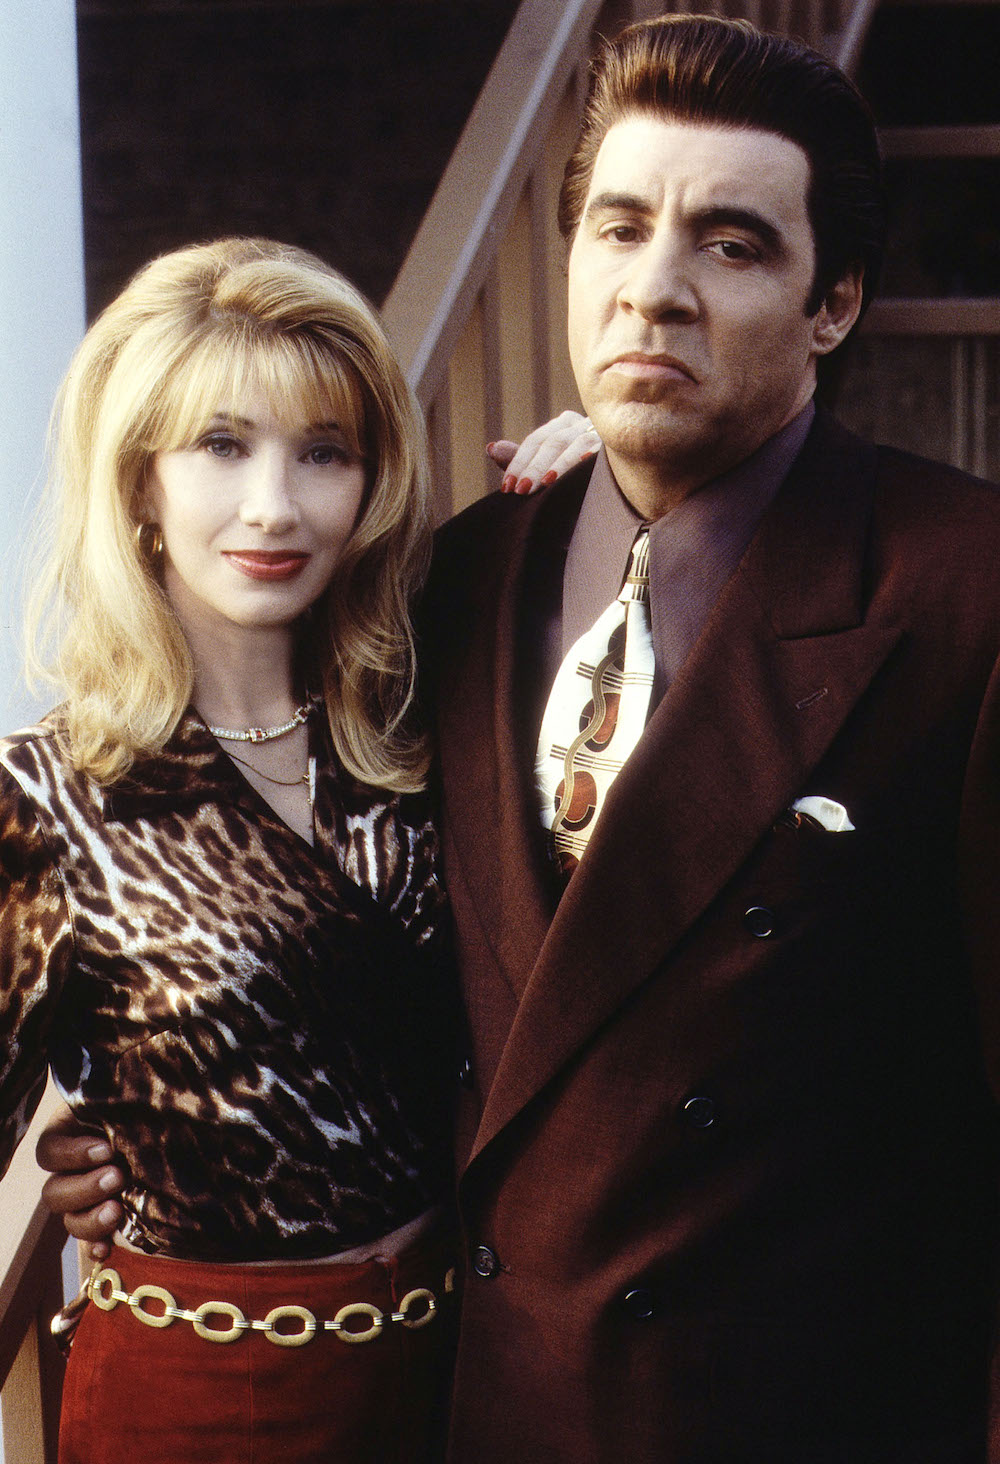 387931 12: Maureen and Steven Van Zandt star as Gabriella and Silvio Dante in HBO's hit television series, "The Sopranos" (Year 3). (Photo by HBO)